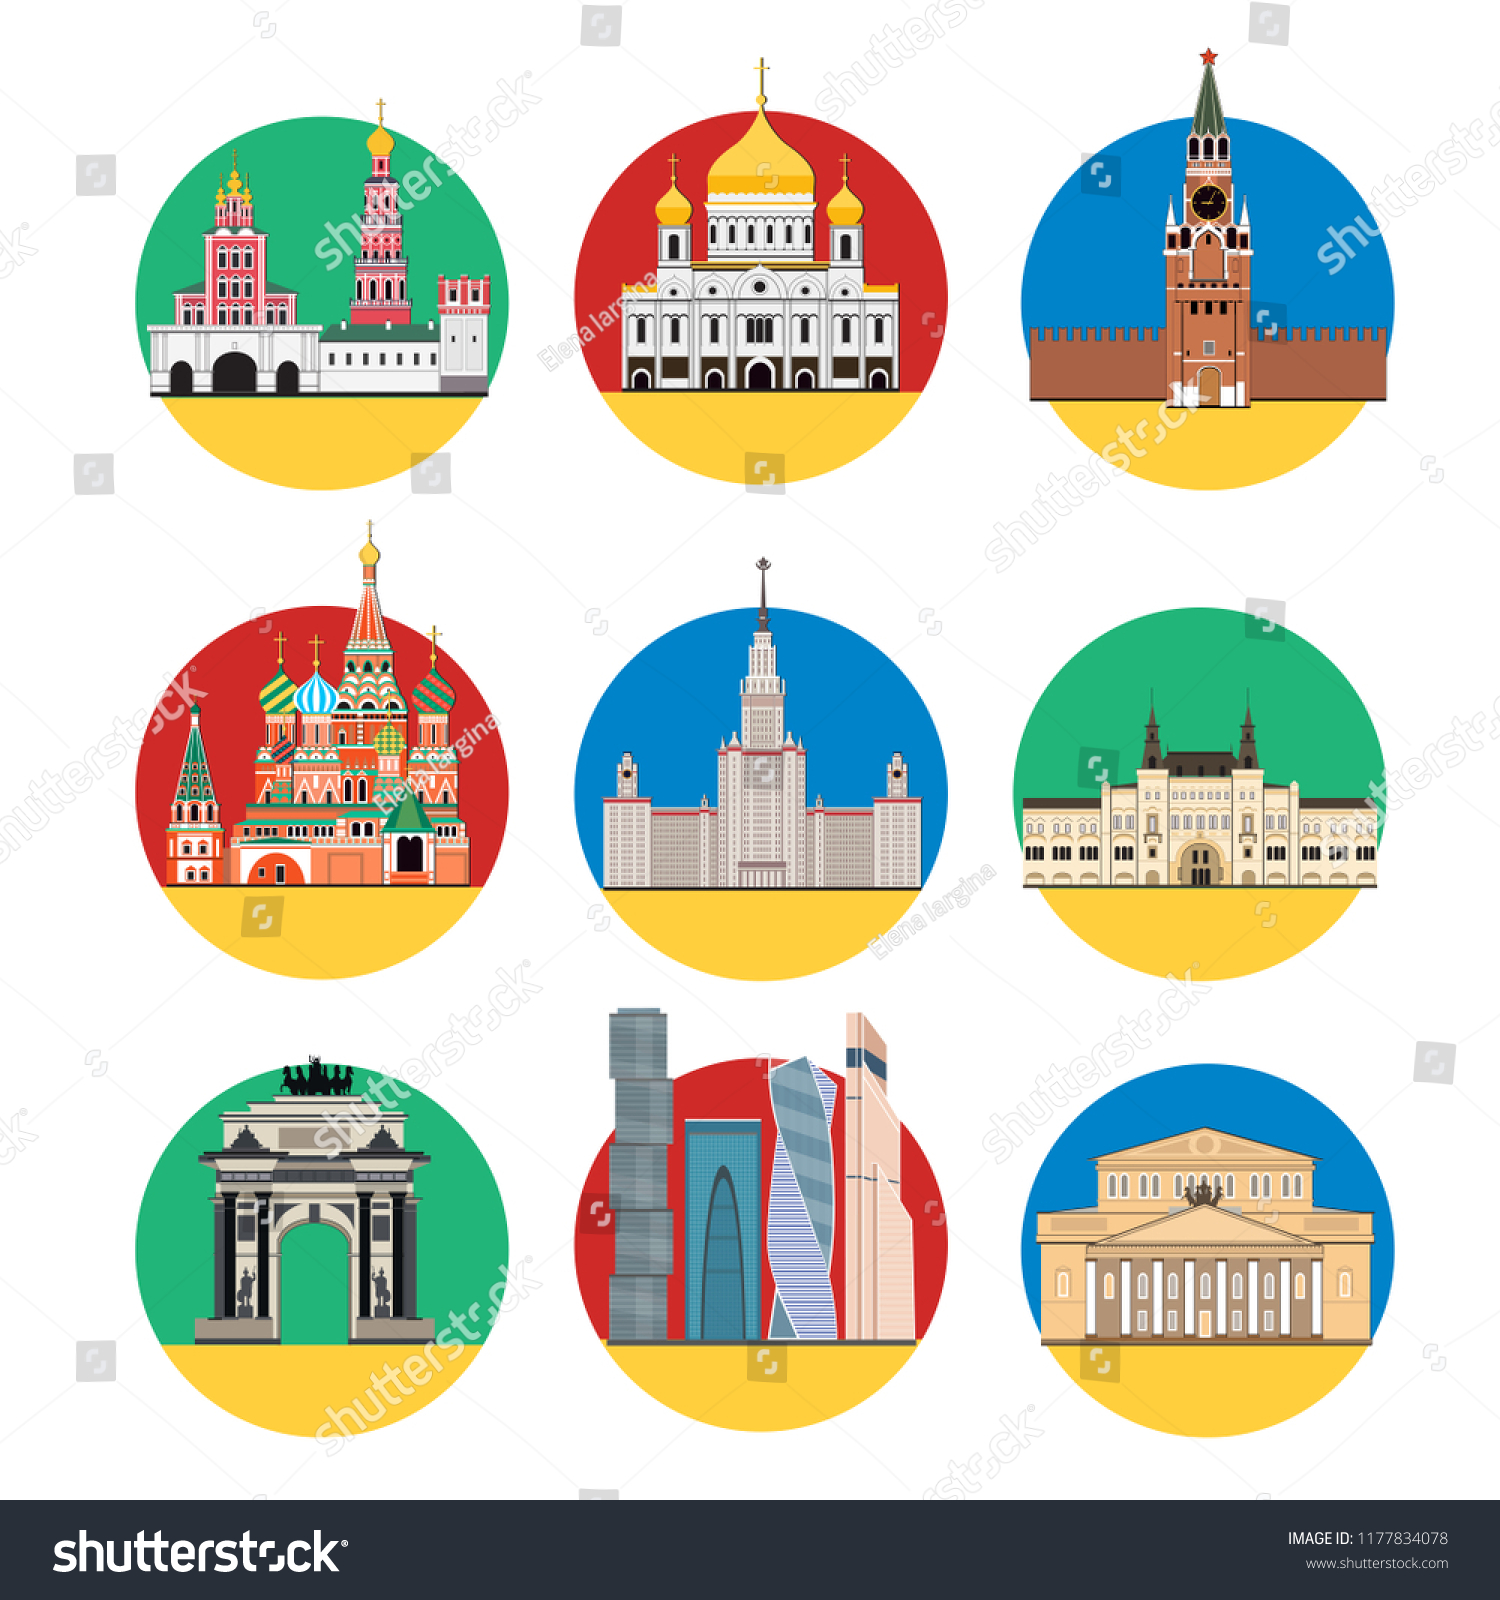 Cartoon symbols and objects set of Moscow. Popular tourist architectural objects: Kremlin, St. Basil's Cathedral,  
Triumphal Arch, Moscow city and another sights. Moscow icons set. #1177834078